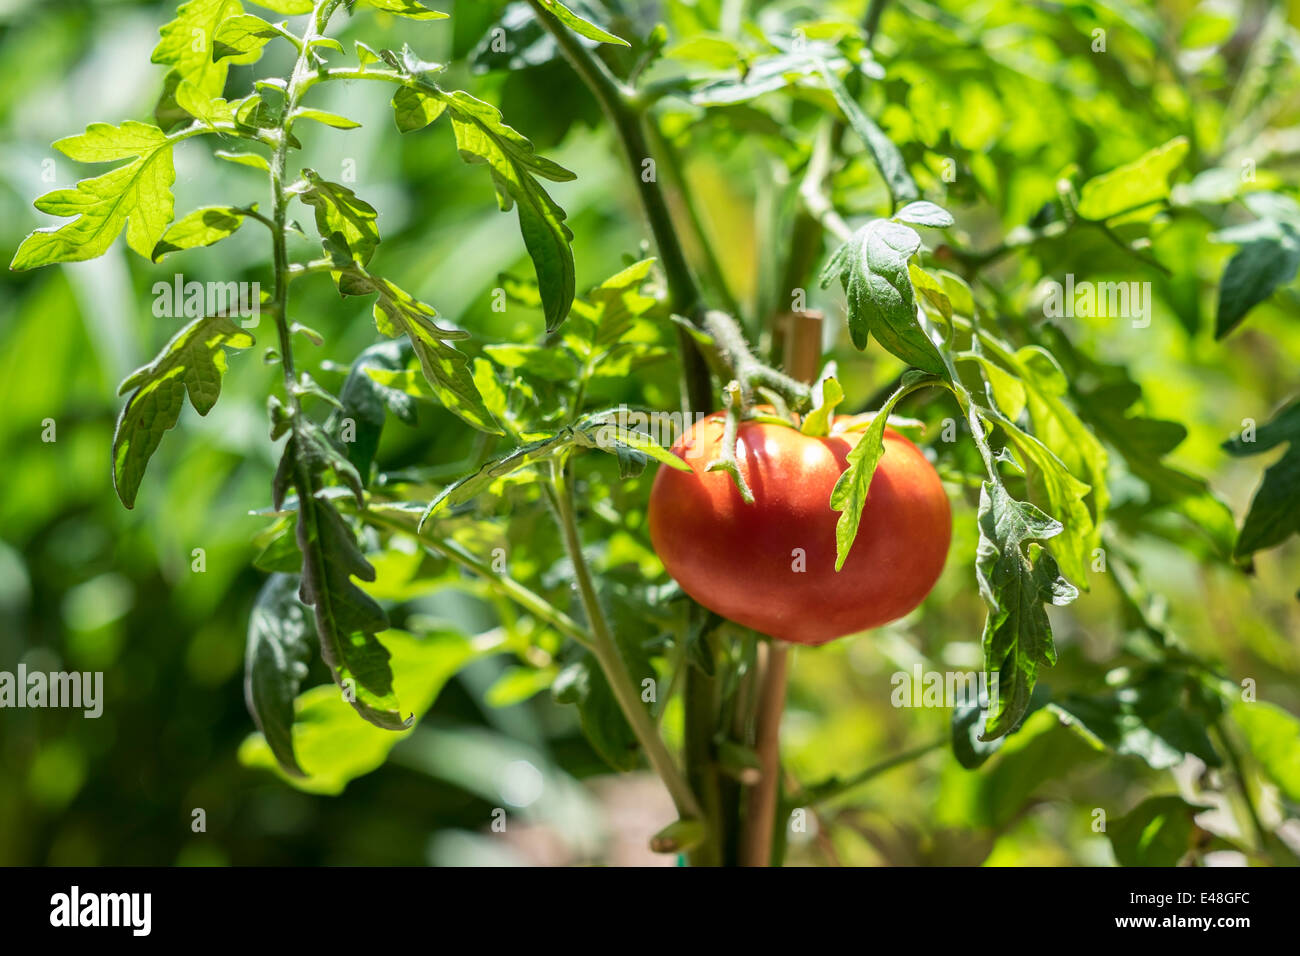 A ripe organically home grown tomato growing outdoors on a vine in the sunshine. USA Stock Photo